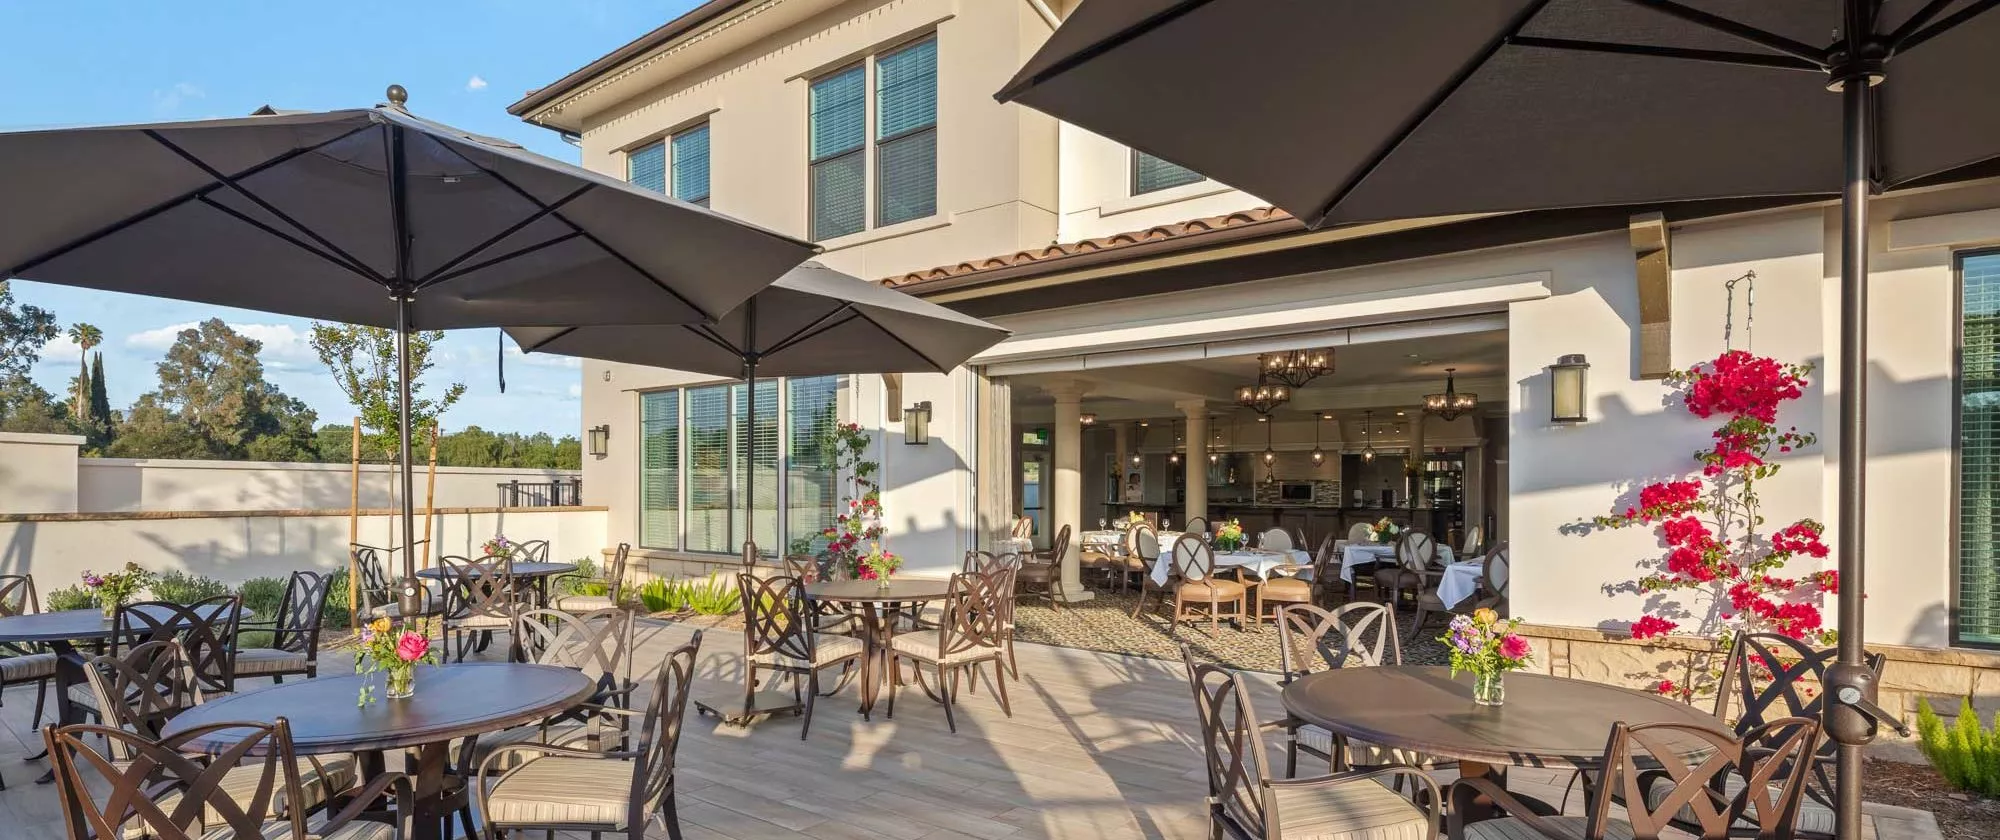 Simi Valley patio with dining tables and umbrellas